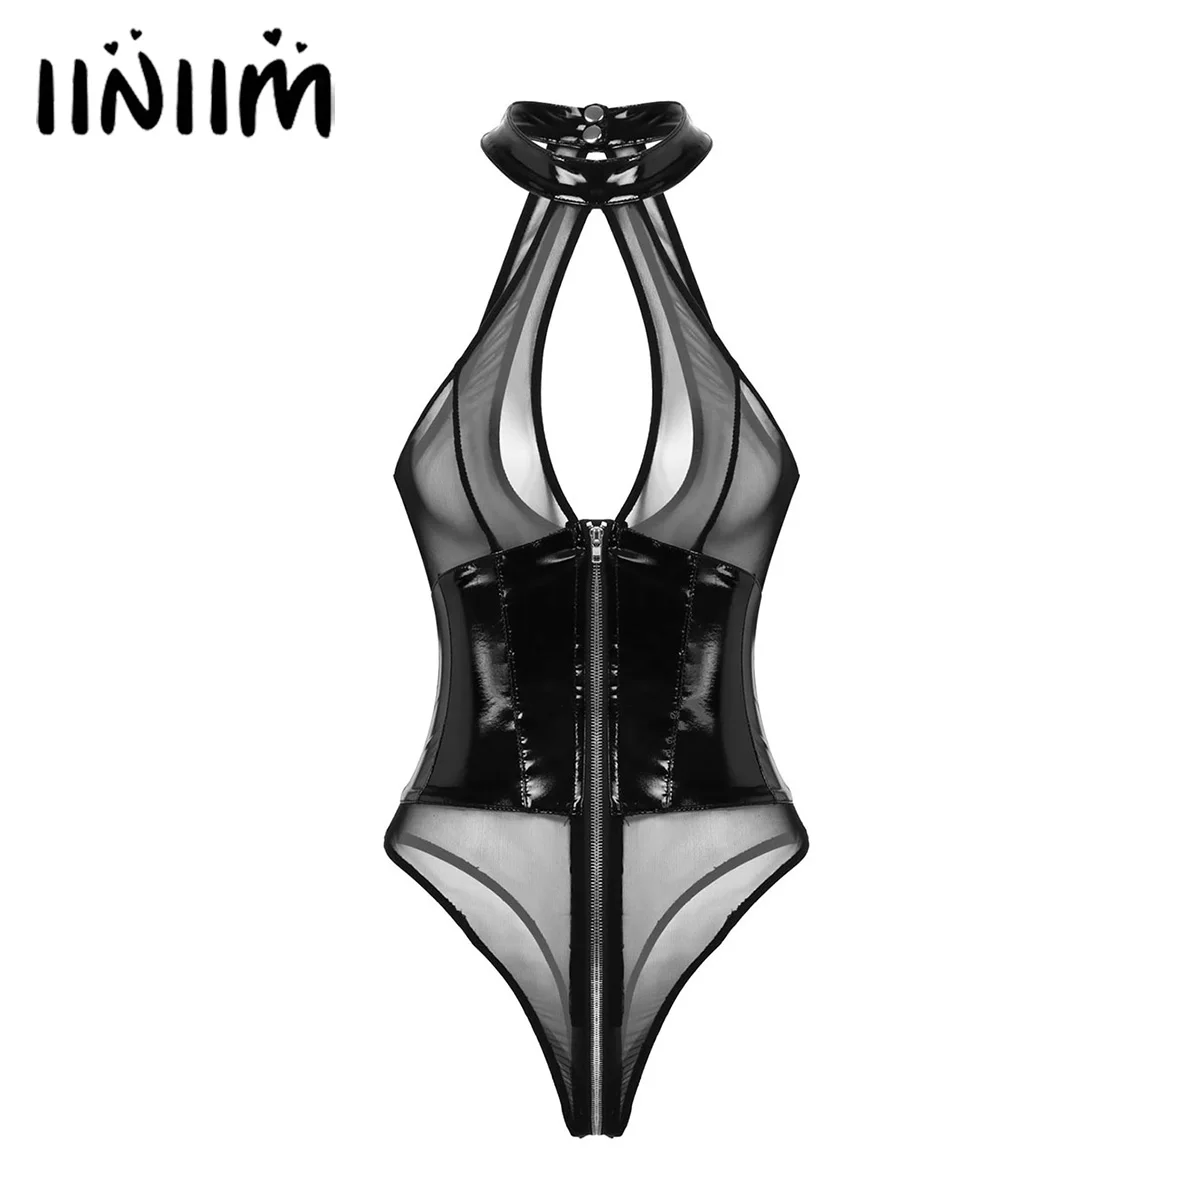 

Women One-piece Sexy Wet Look Lingerie Catsuit Leather Sheer Mesh Splice Halter Neck Breast Hollow Out High Cut Leotard Bodysuit